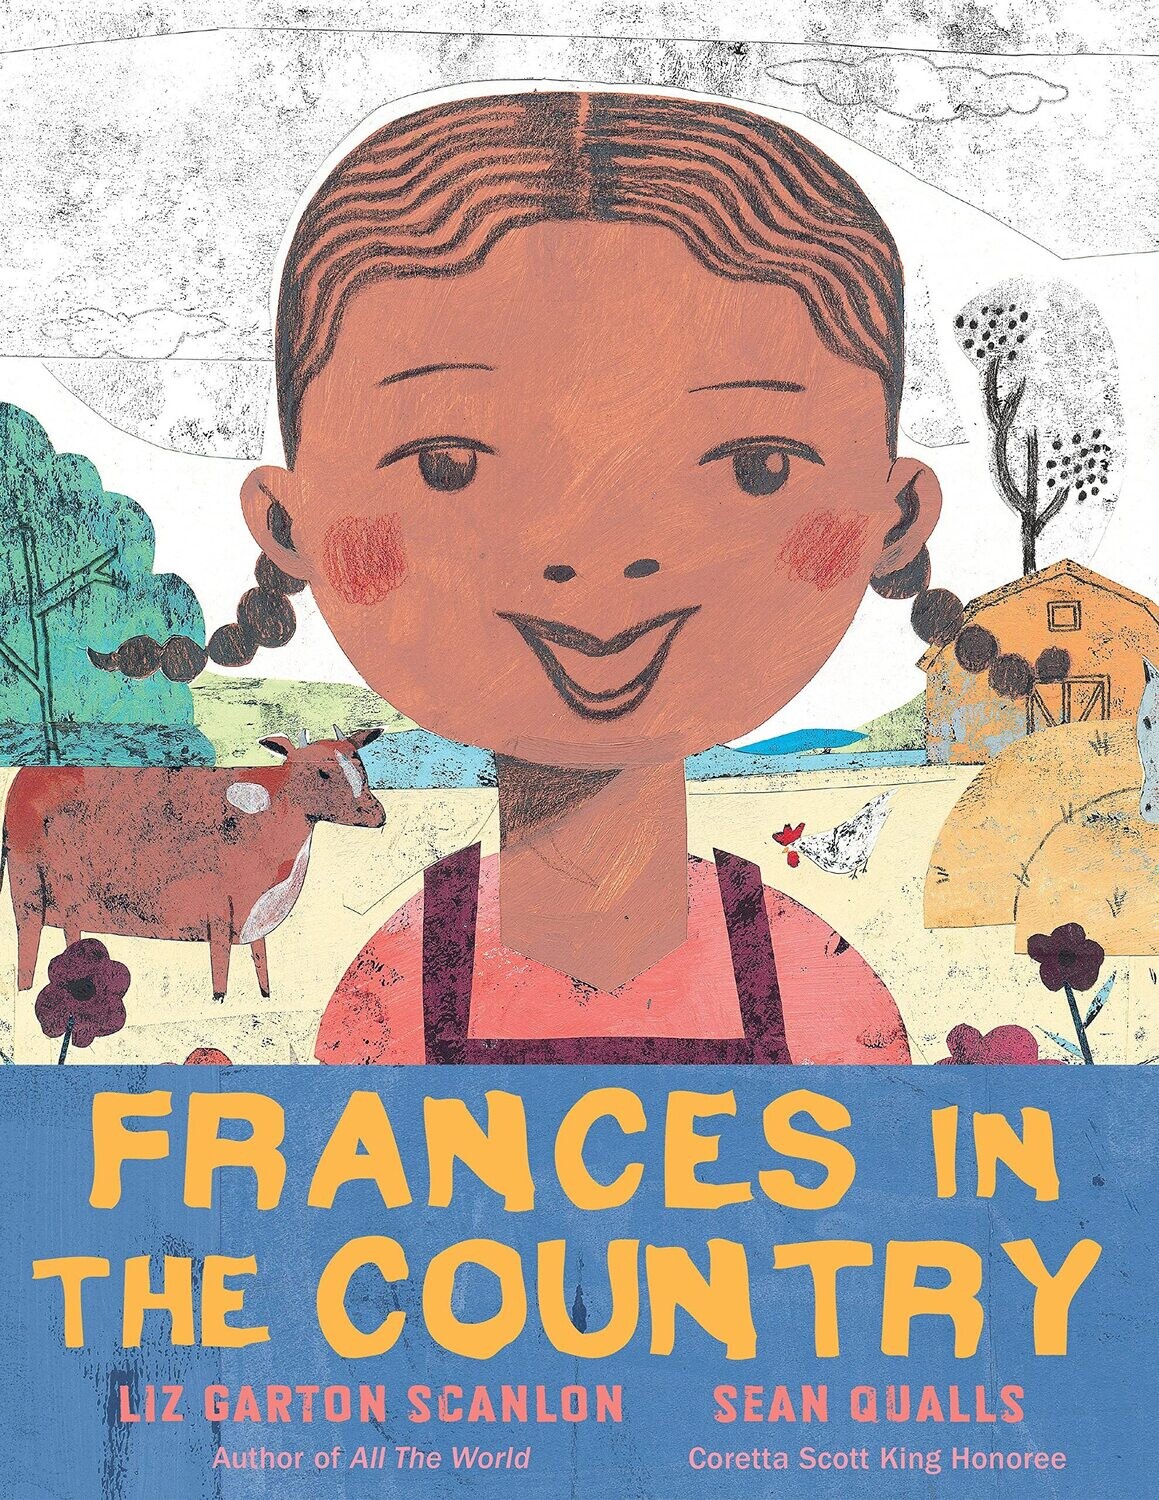 Frances in the Country - Liz Scanlon and Sean Qualls